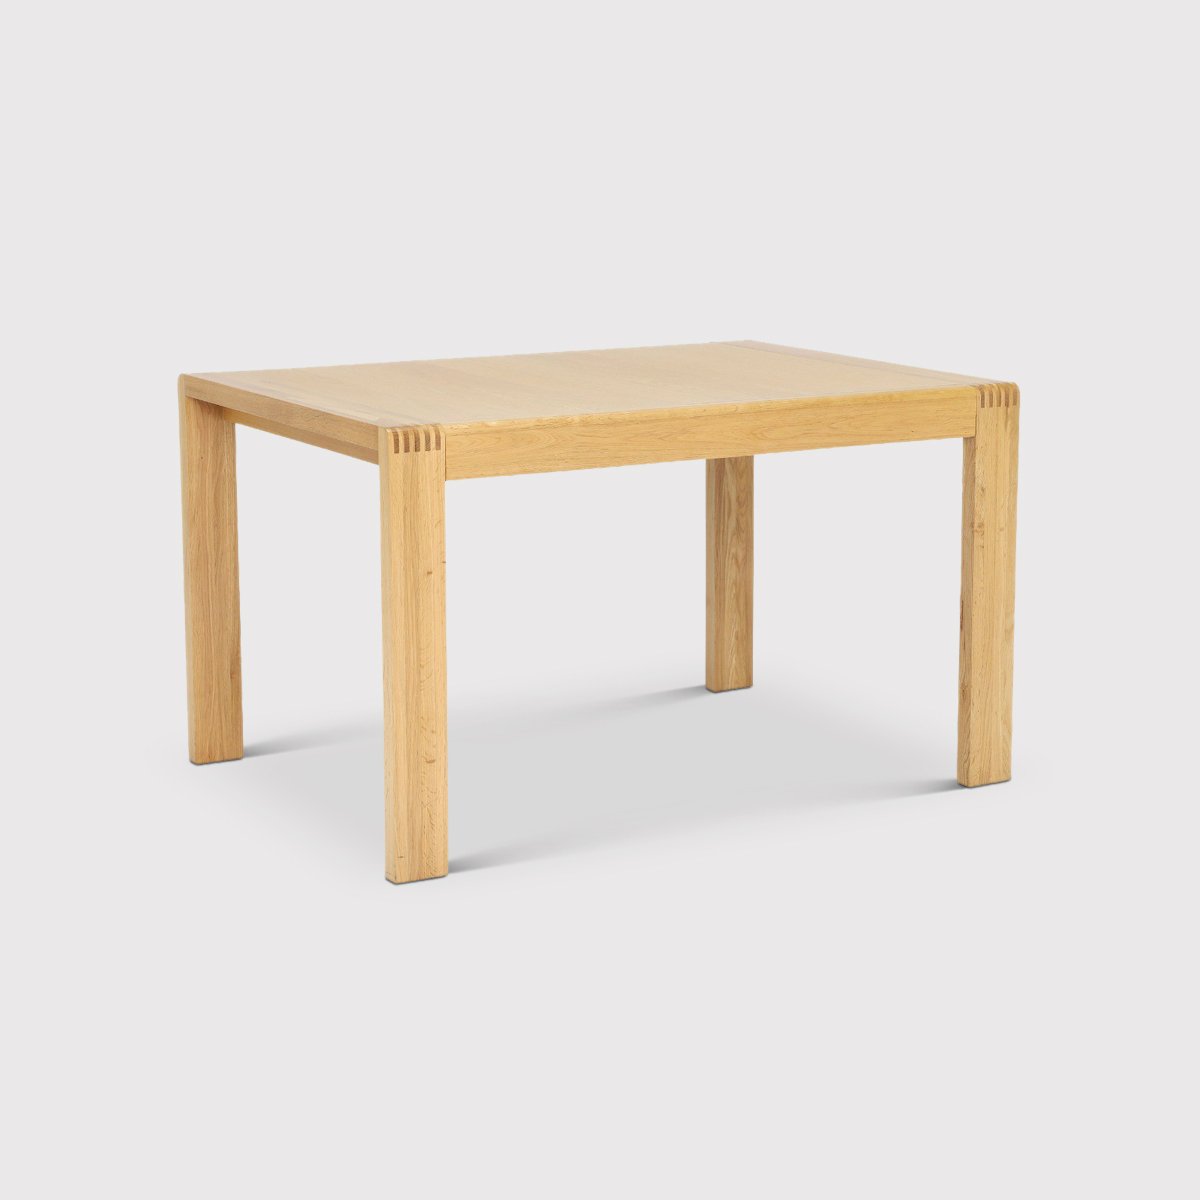 Ercol Bosco Small Extending Dining Table, Neutral Wood | W125cm | Barker & Stonehouse